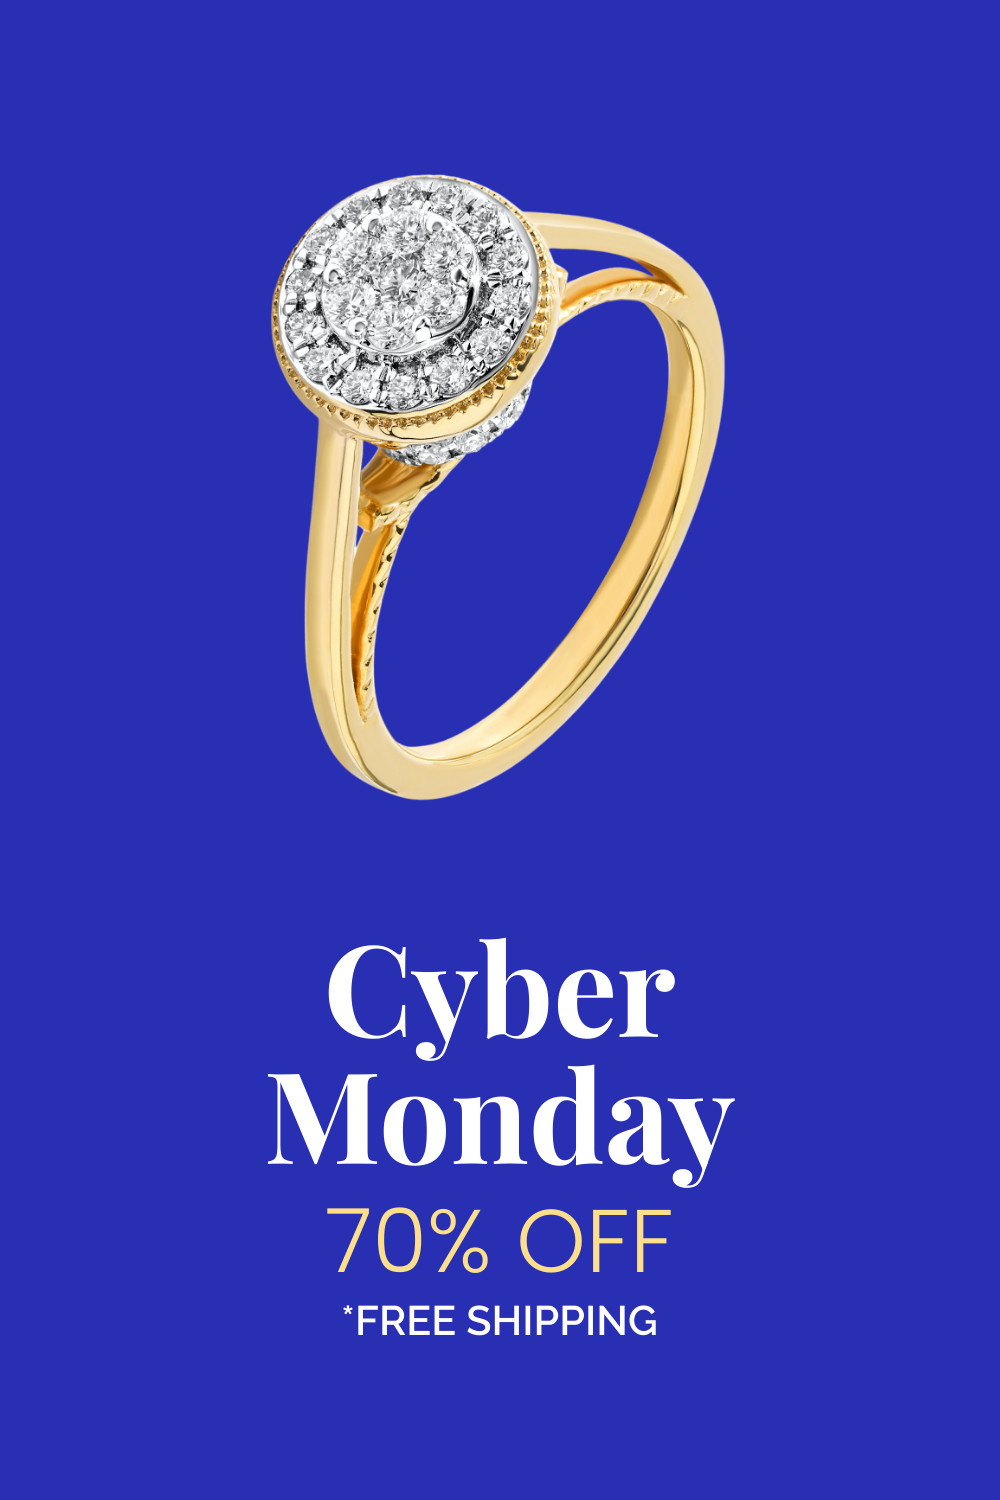 Cyber Monday Engagement Ring Deals Inline Rectangle 300x250